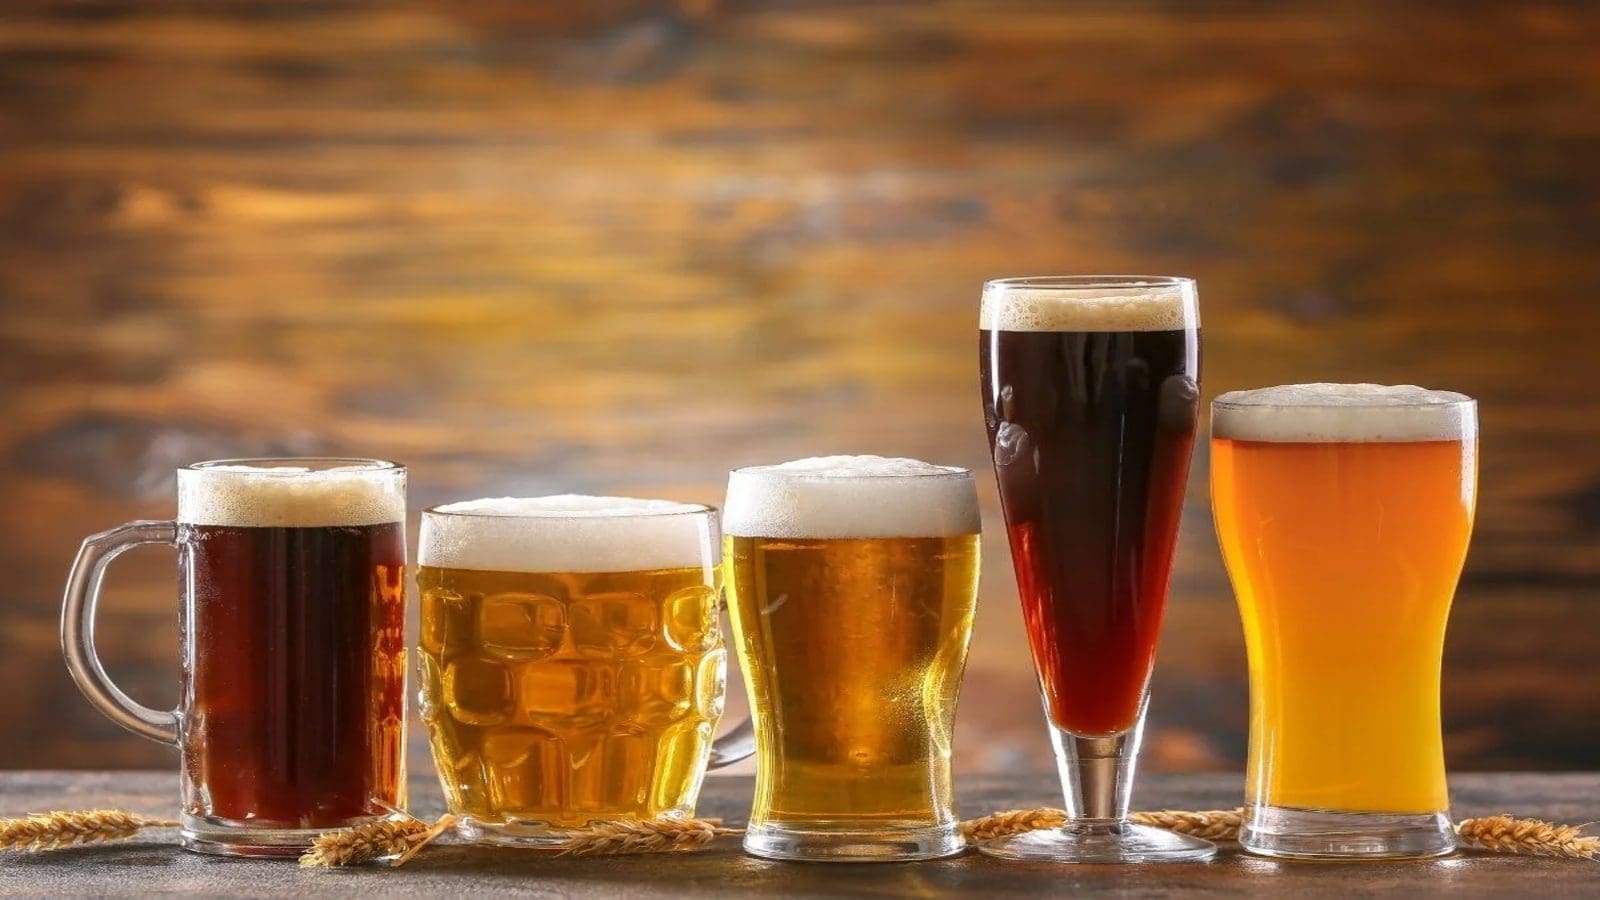 IWSR research provides insights into how brewers adapt to changing drinking patterns